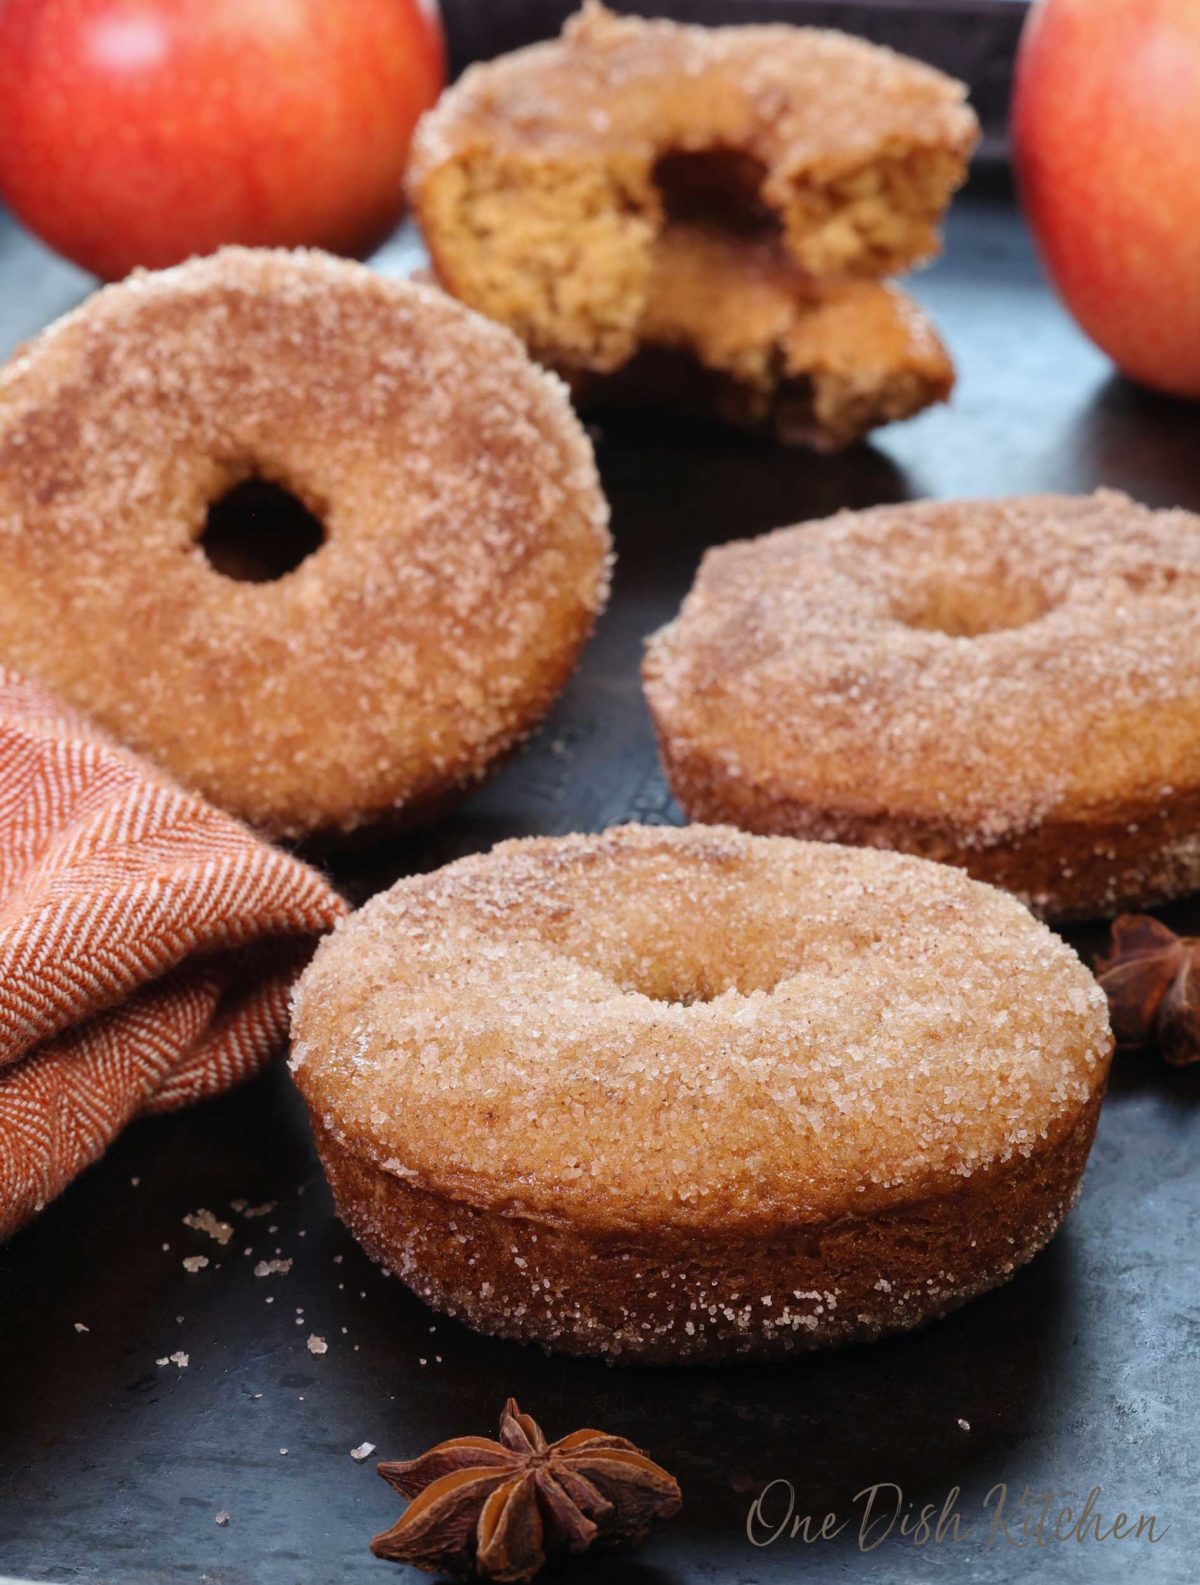 four apple cider donuts with a dusting of cinnamon sugar next to two apples and a star anise.